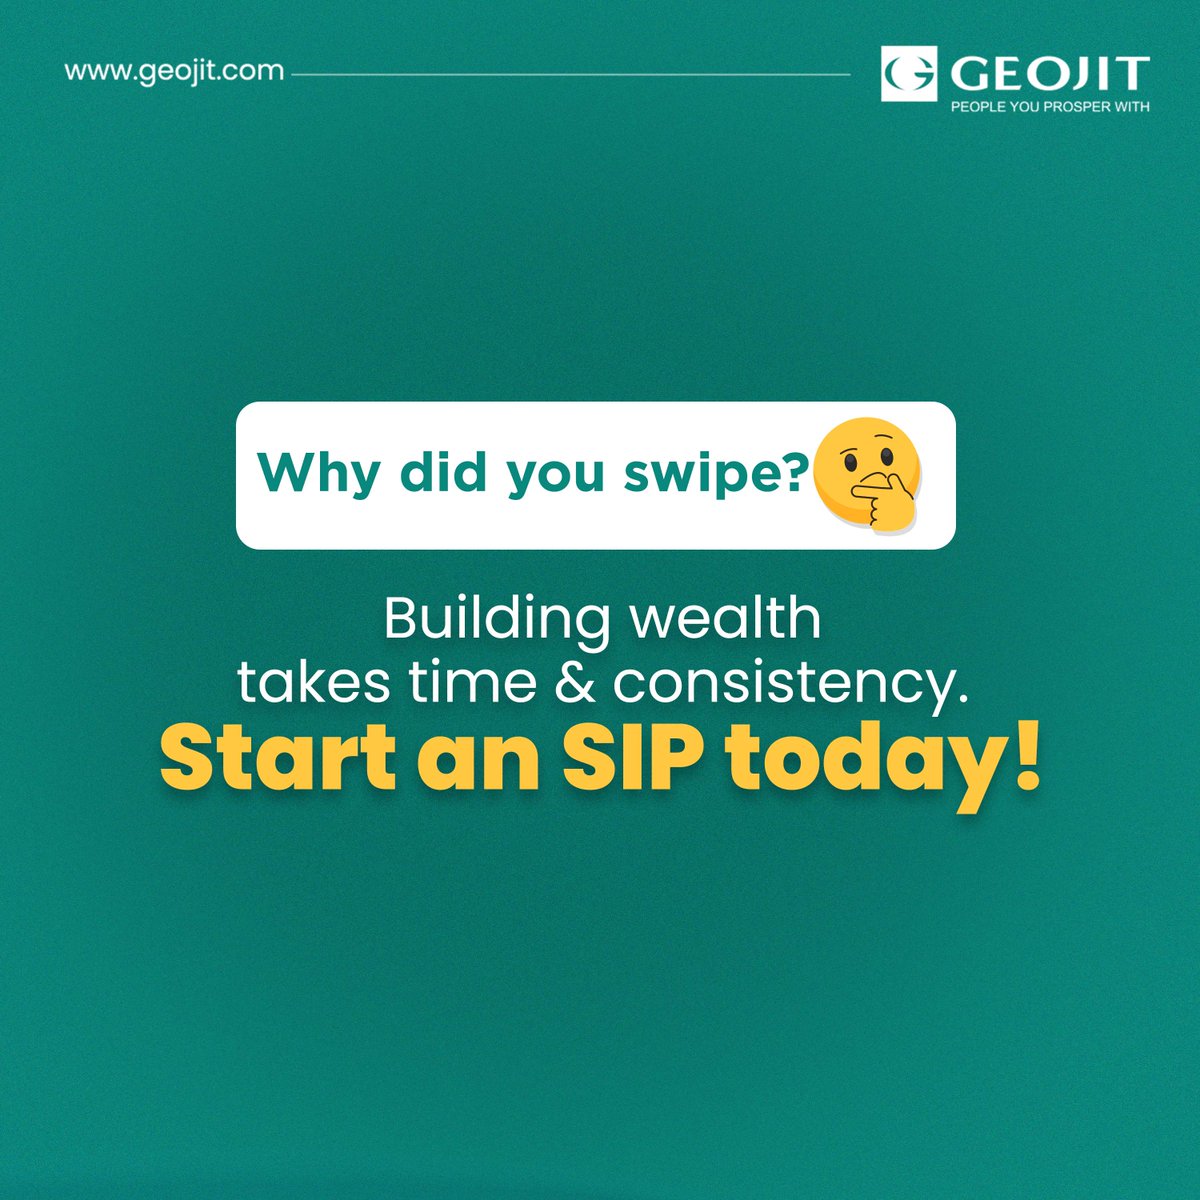 Want to become rich in no time? Swipe to know how!

#Investmentstrategy #geojit #invest #sensex #stockmarket #trading #stocks #sectors #investing #economy #business #investor #finance #fixedincome #mutualfunds #trend